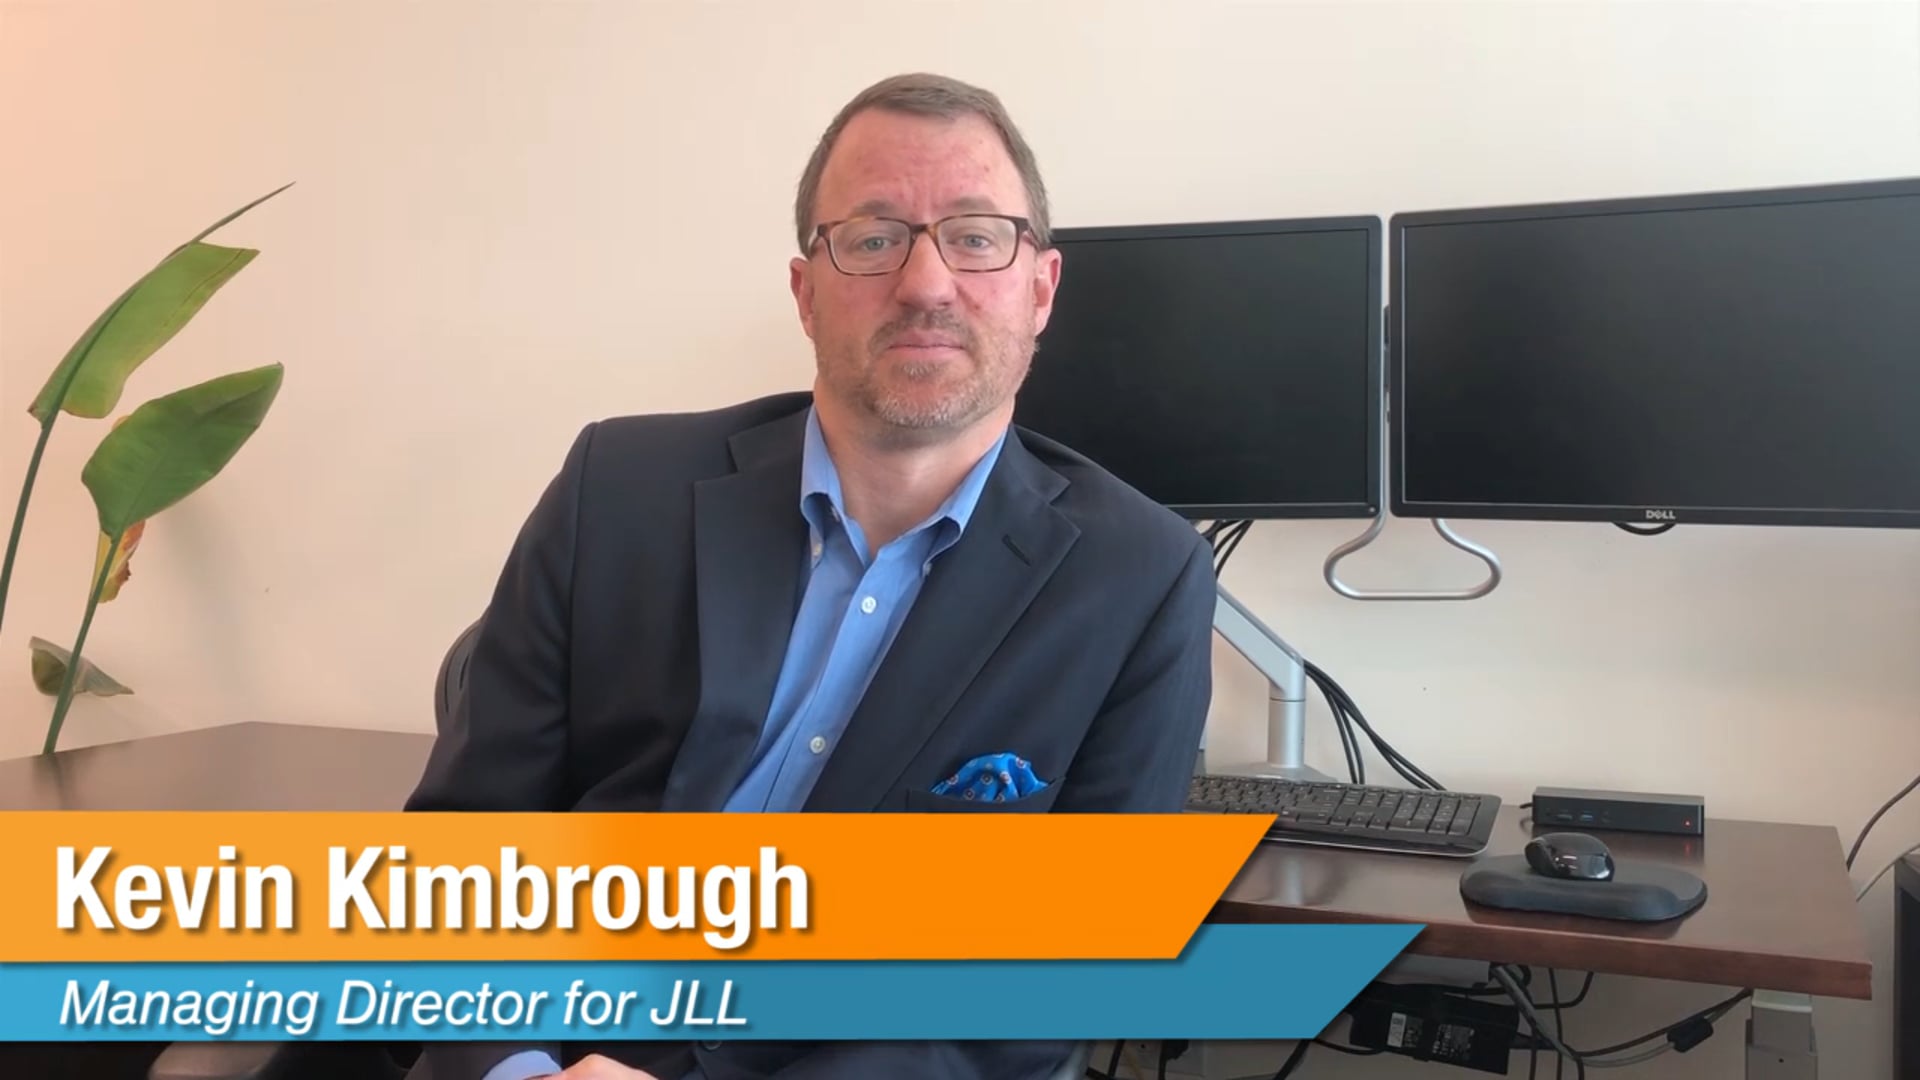 DreamJobbing With... Kevin Kimbrough